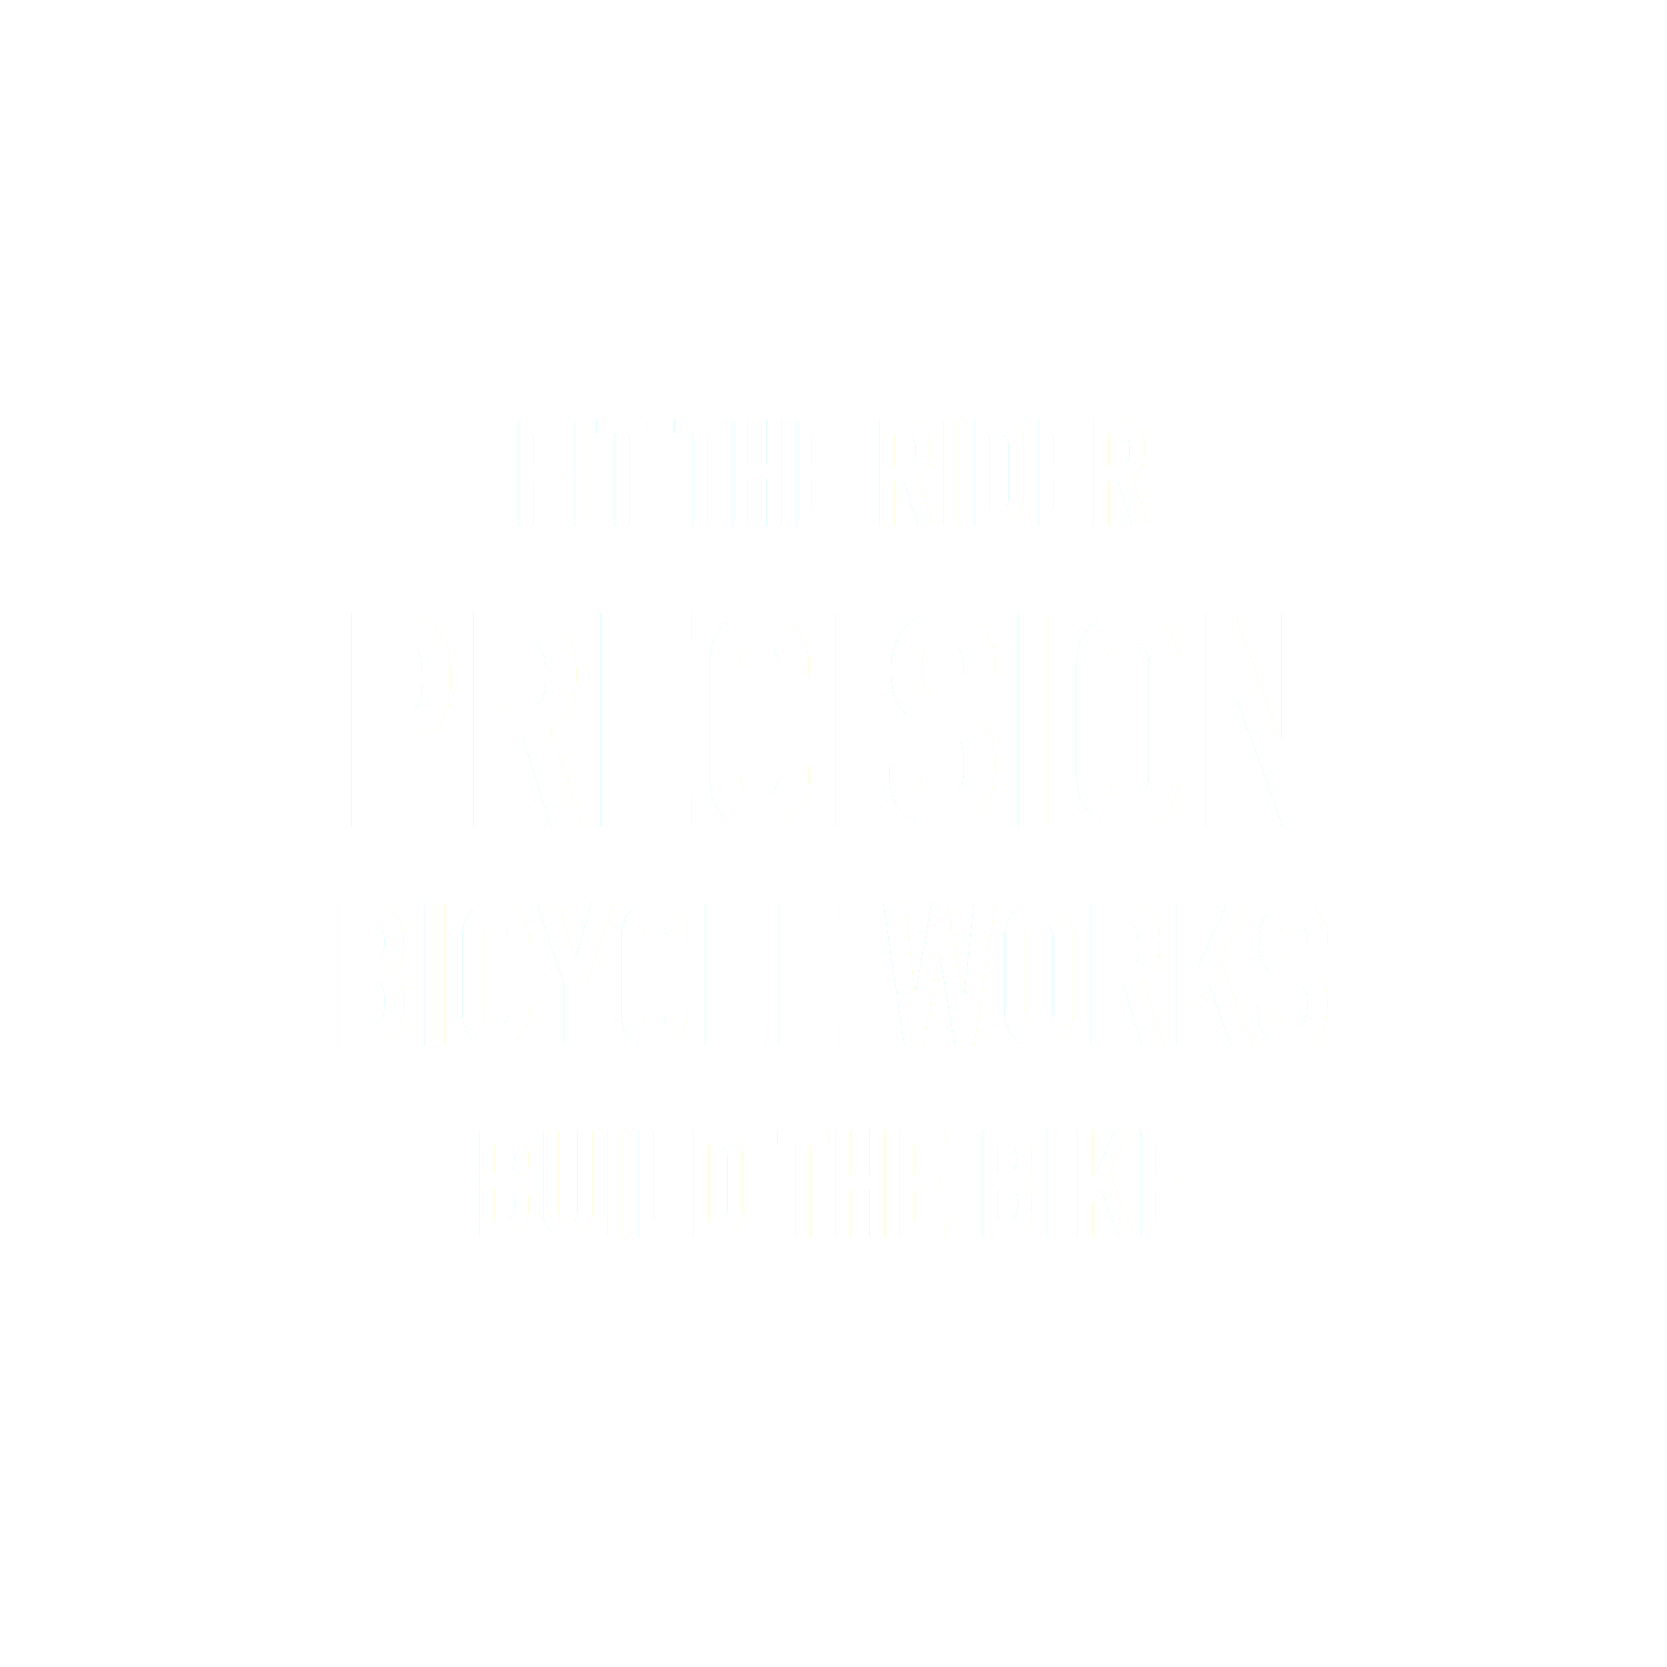 PRECISION BICYCLE WORKS